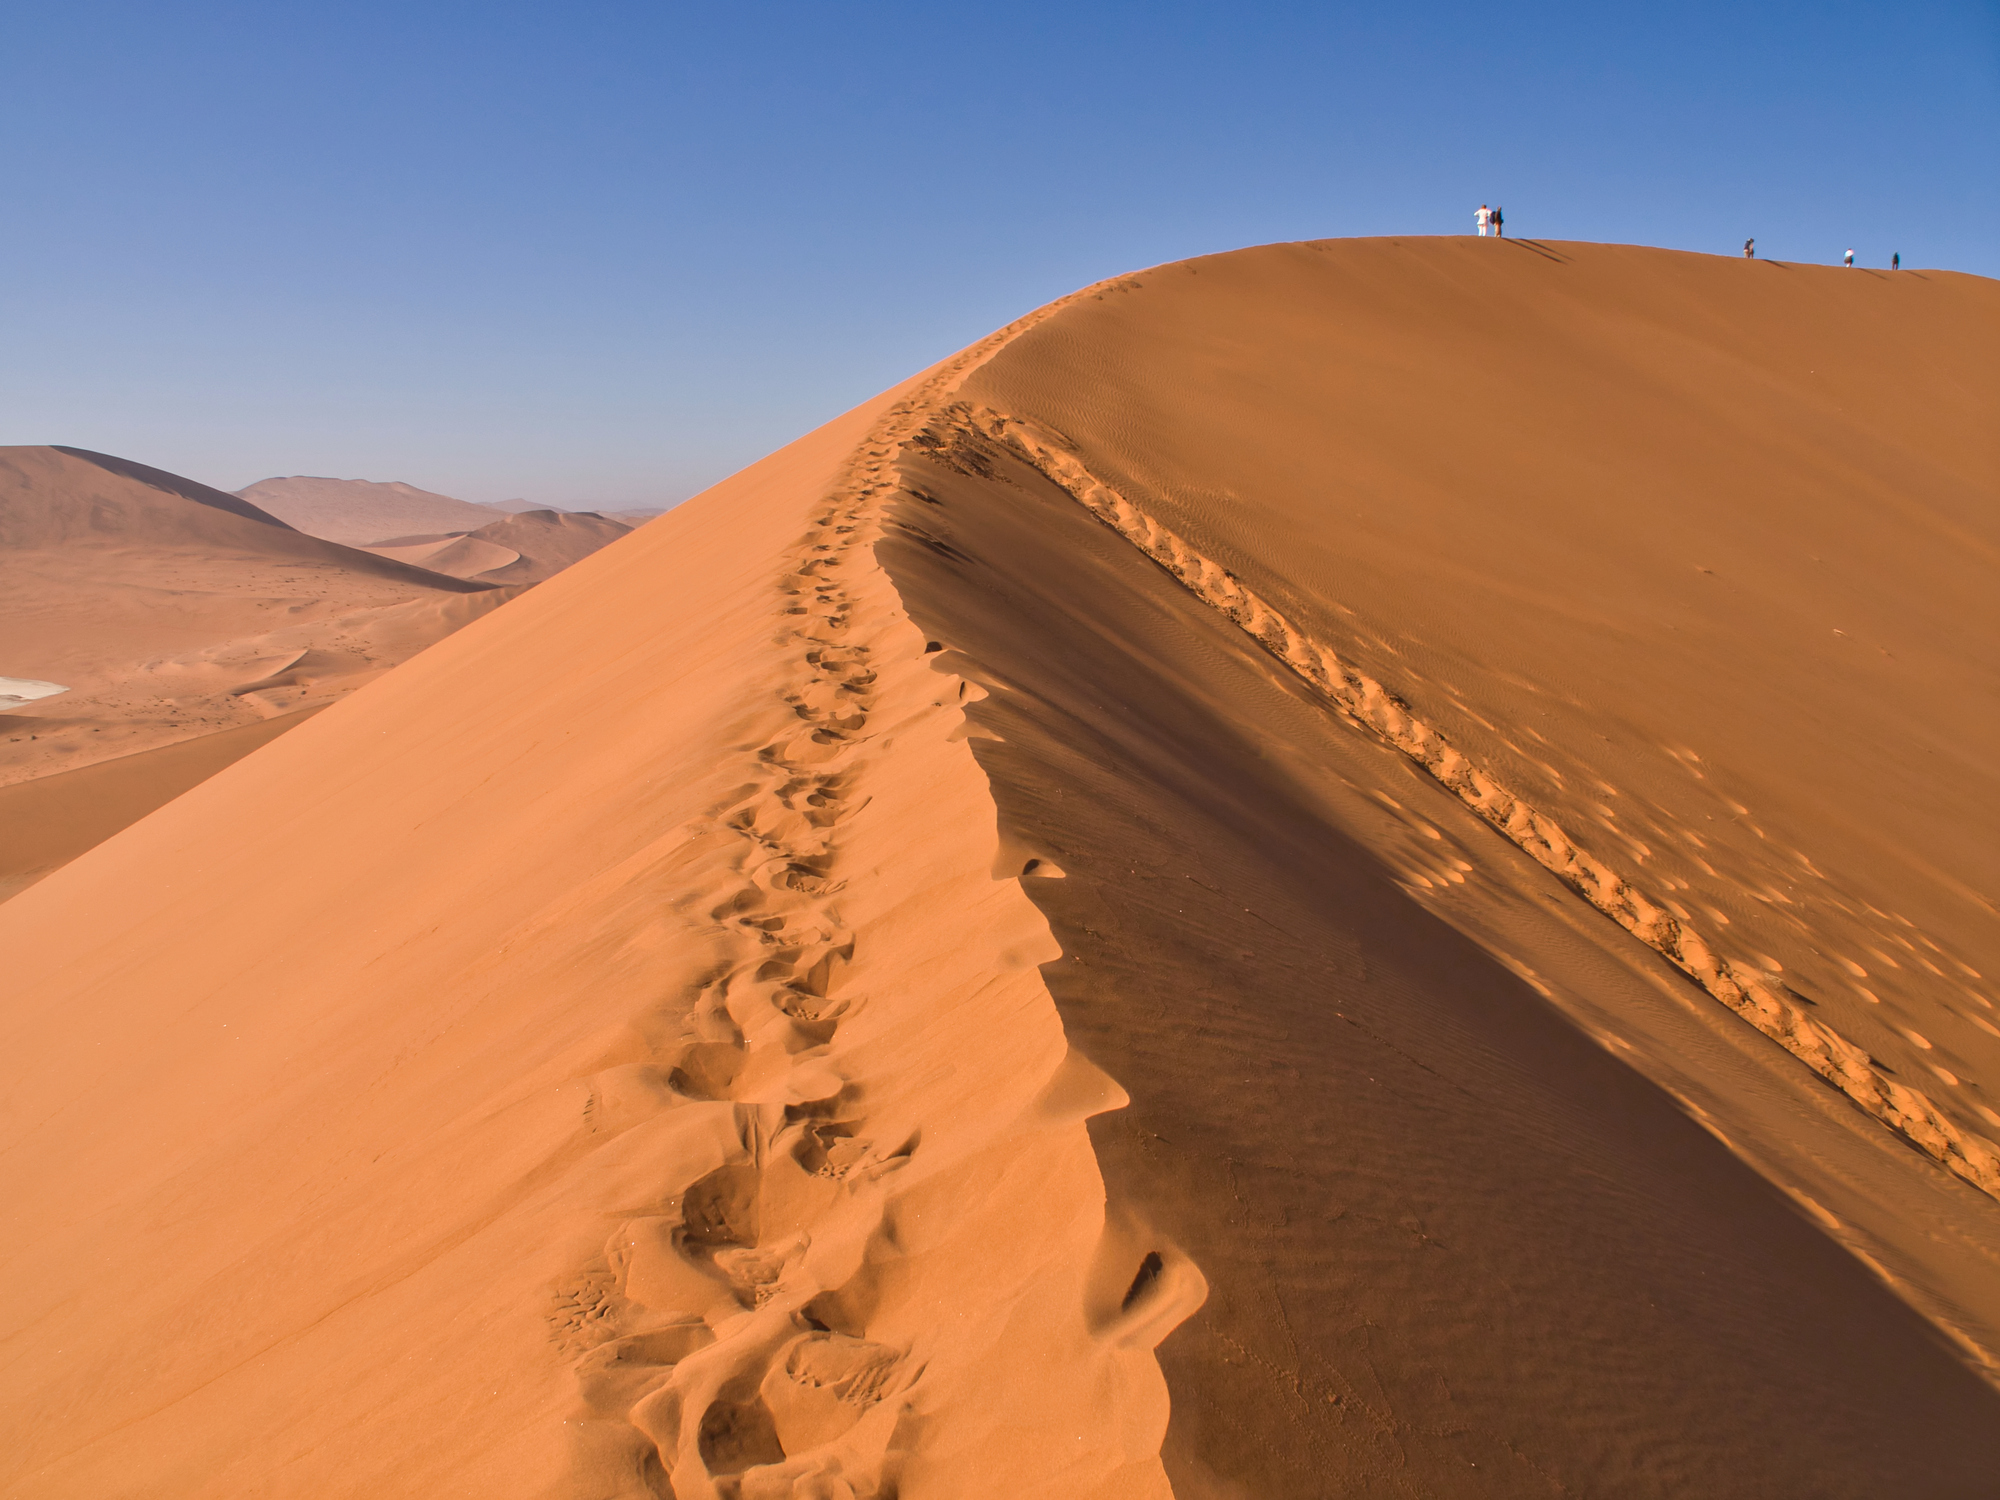 The highest sand dune in the world; the Big Daddy on the edge of the Deadvlei